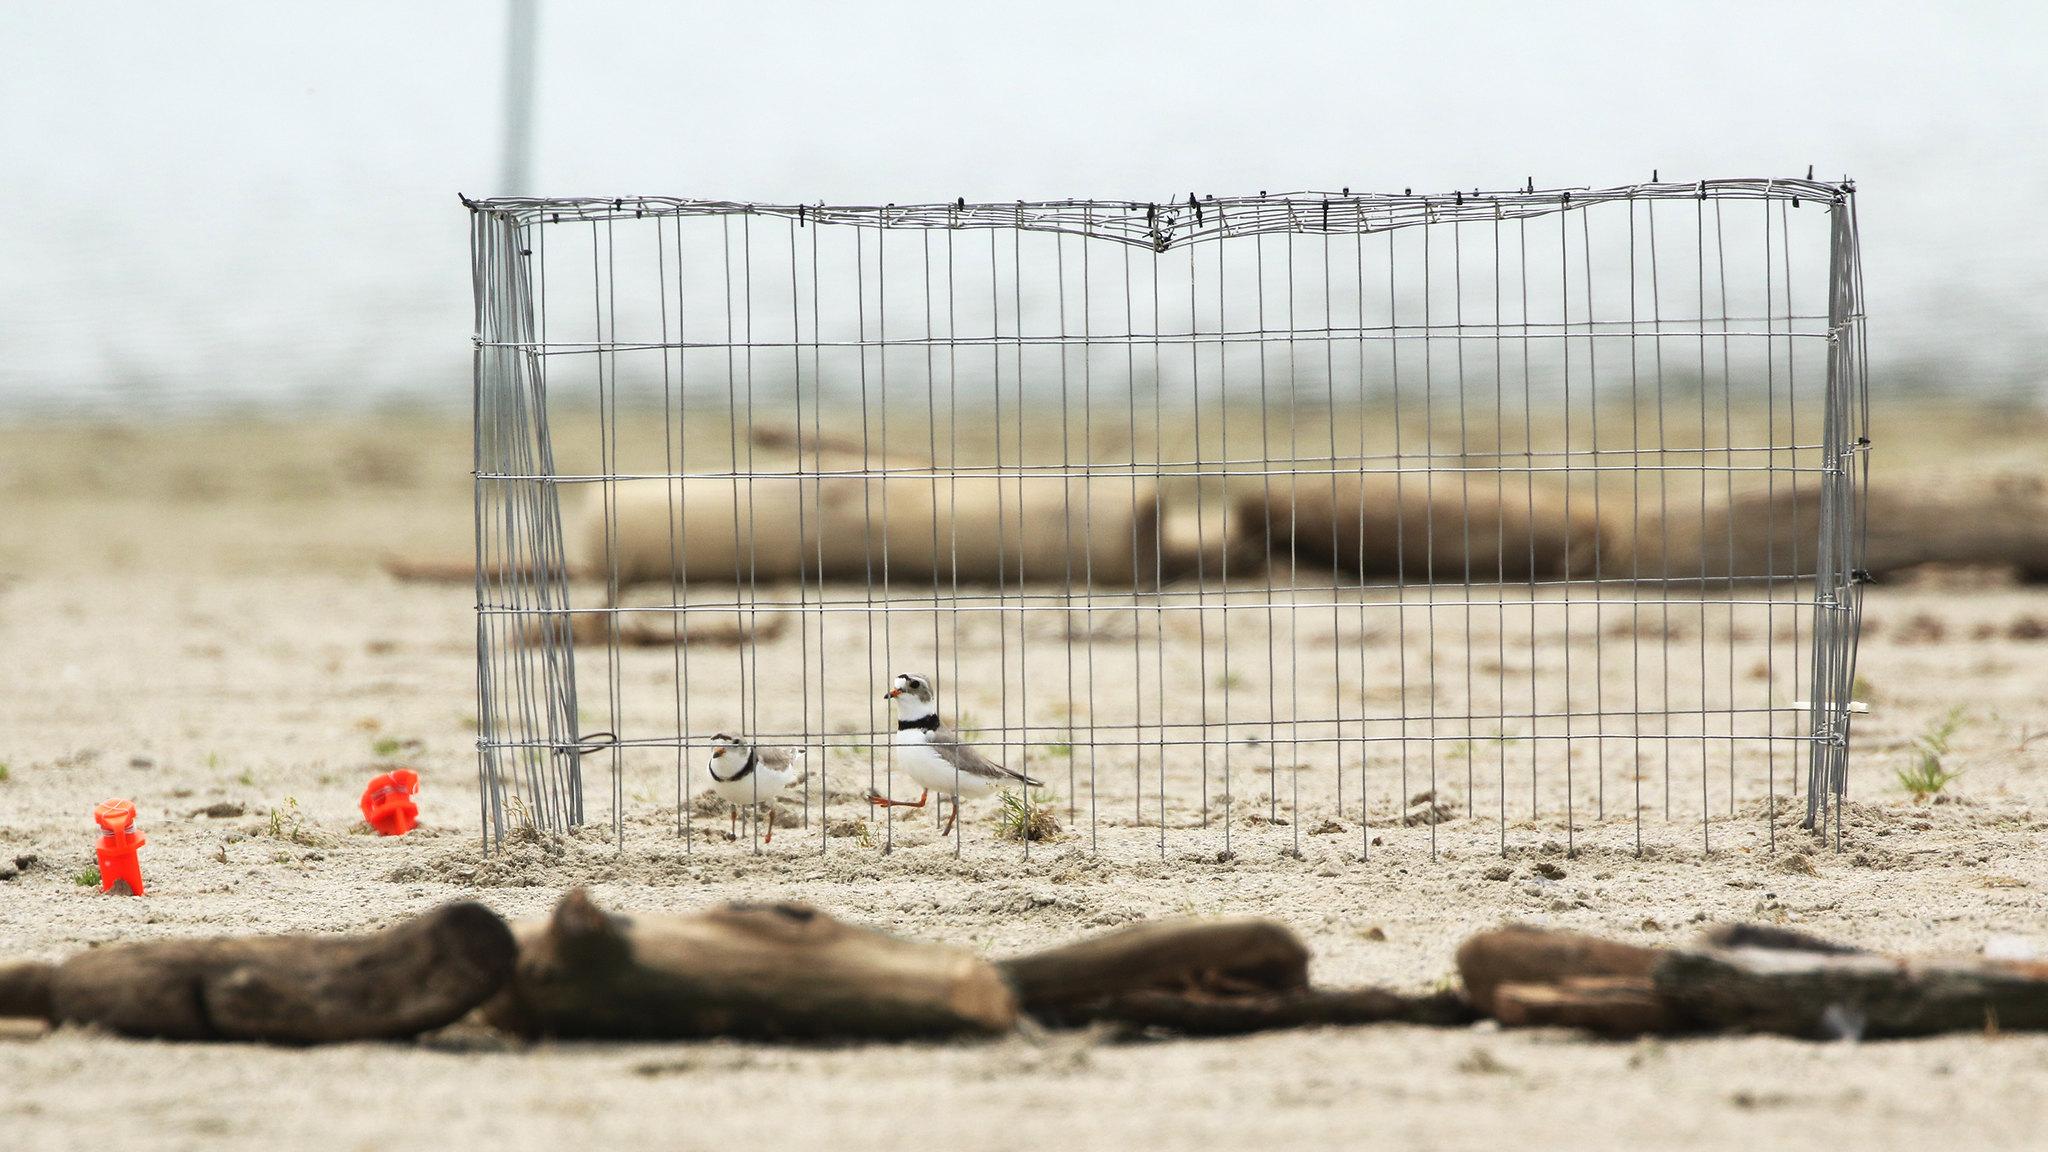 Wildlife officials surround piping plover nests with protective enclosures, like this one used in 2021 to guard plover eggs on the shore of Lake Erie in Ohio. (U.S. Fish and Wildlife Service Midwest Region)